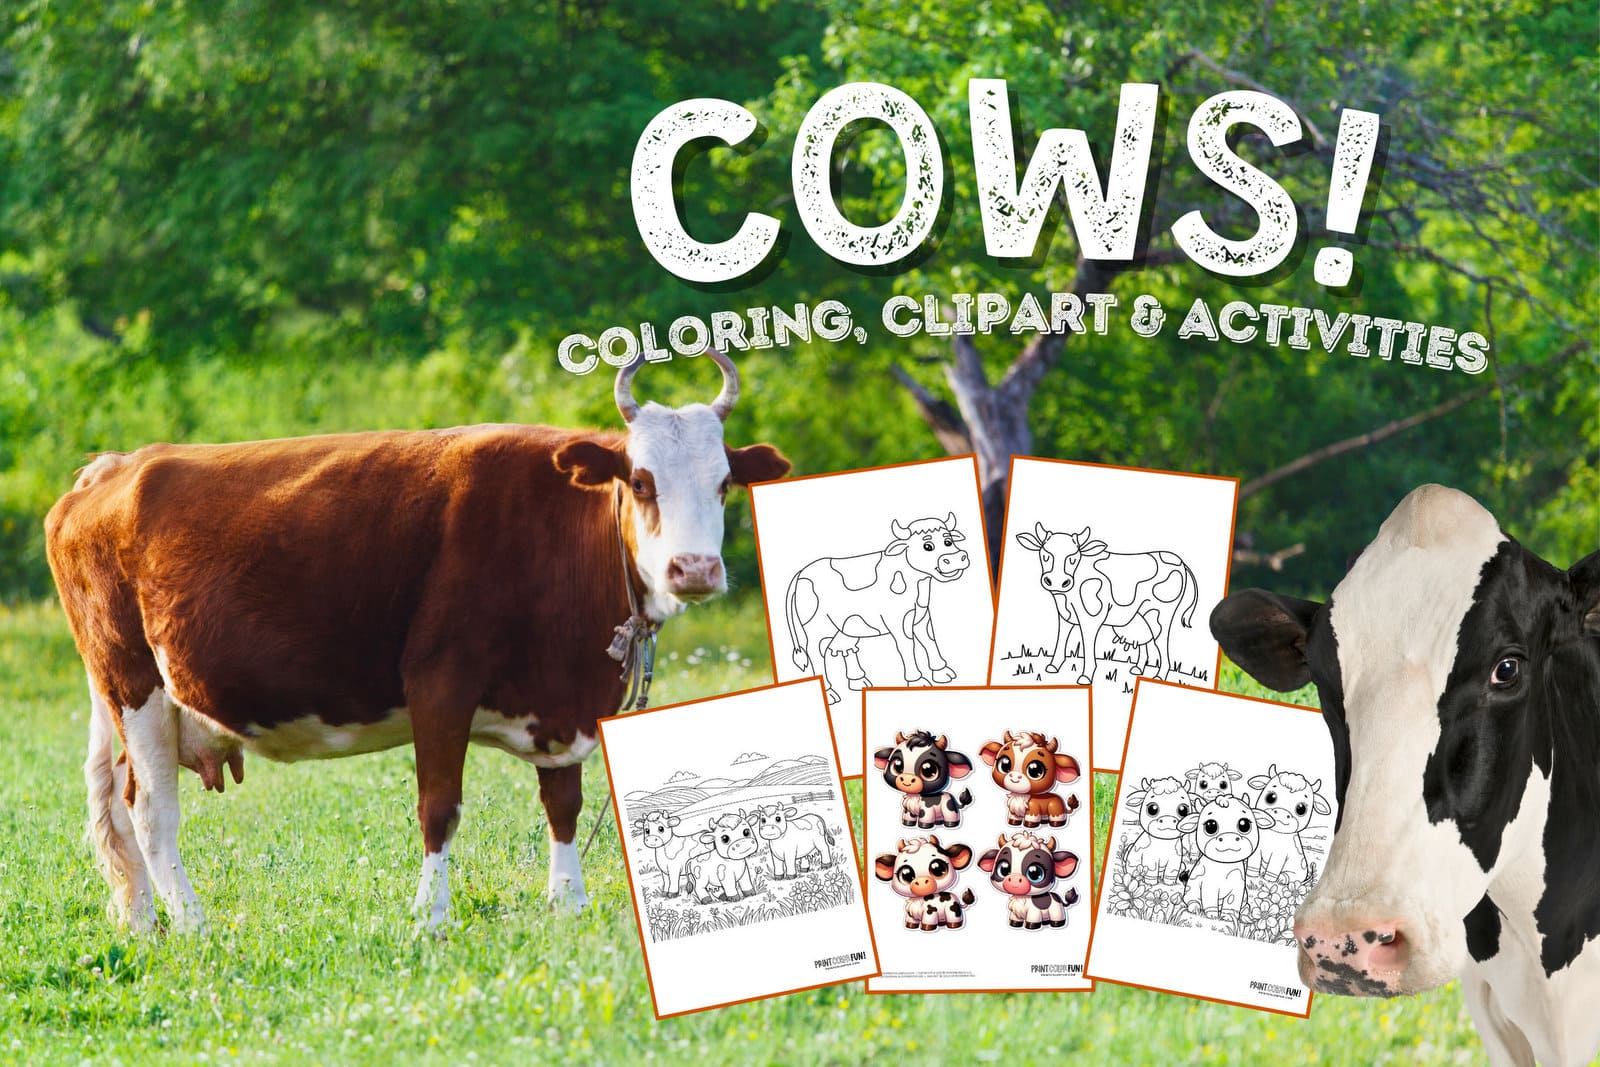 Cows coloring page clipart activities from PrintColorFun com